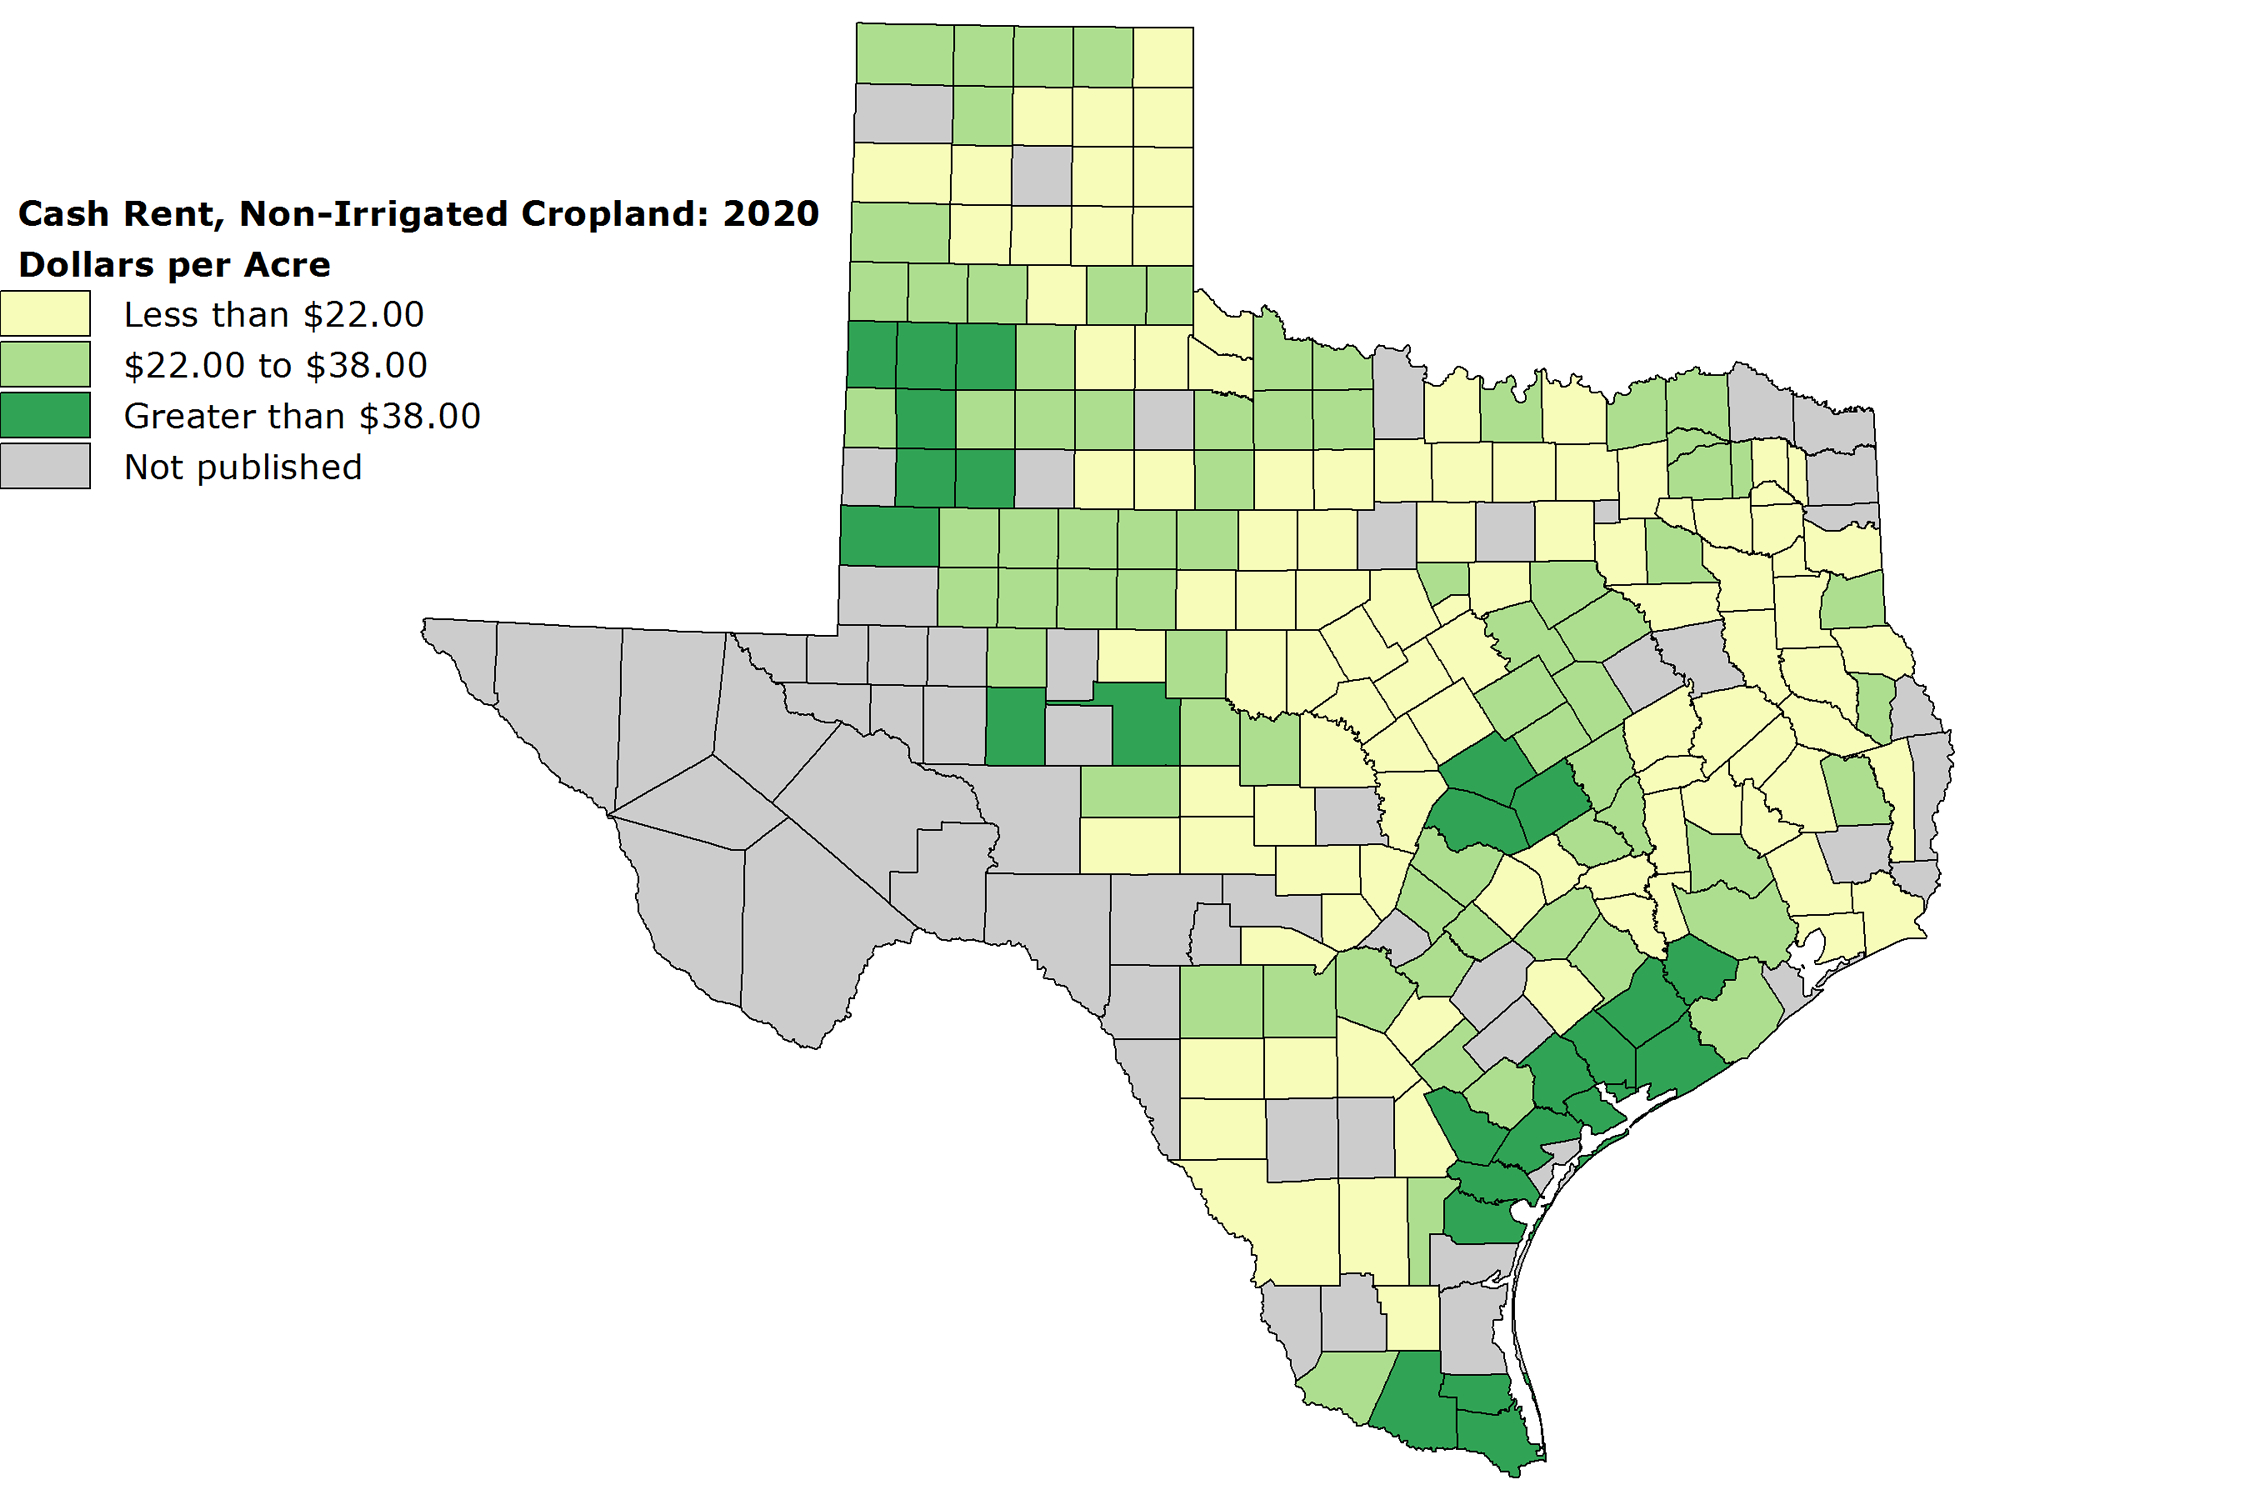 USDA National Agricultural Statistics Service Texas County